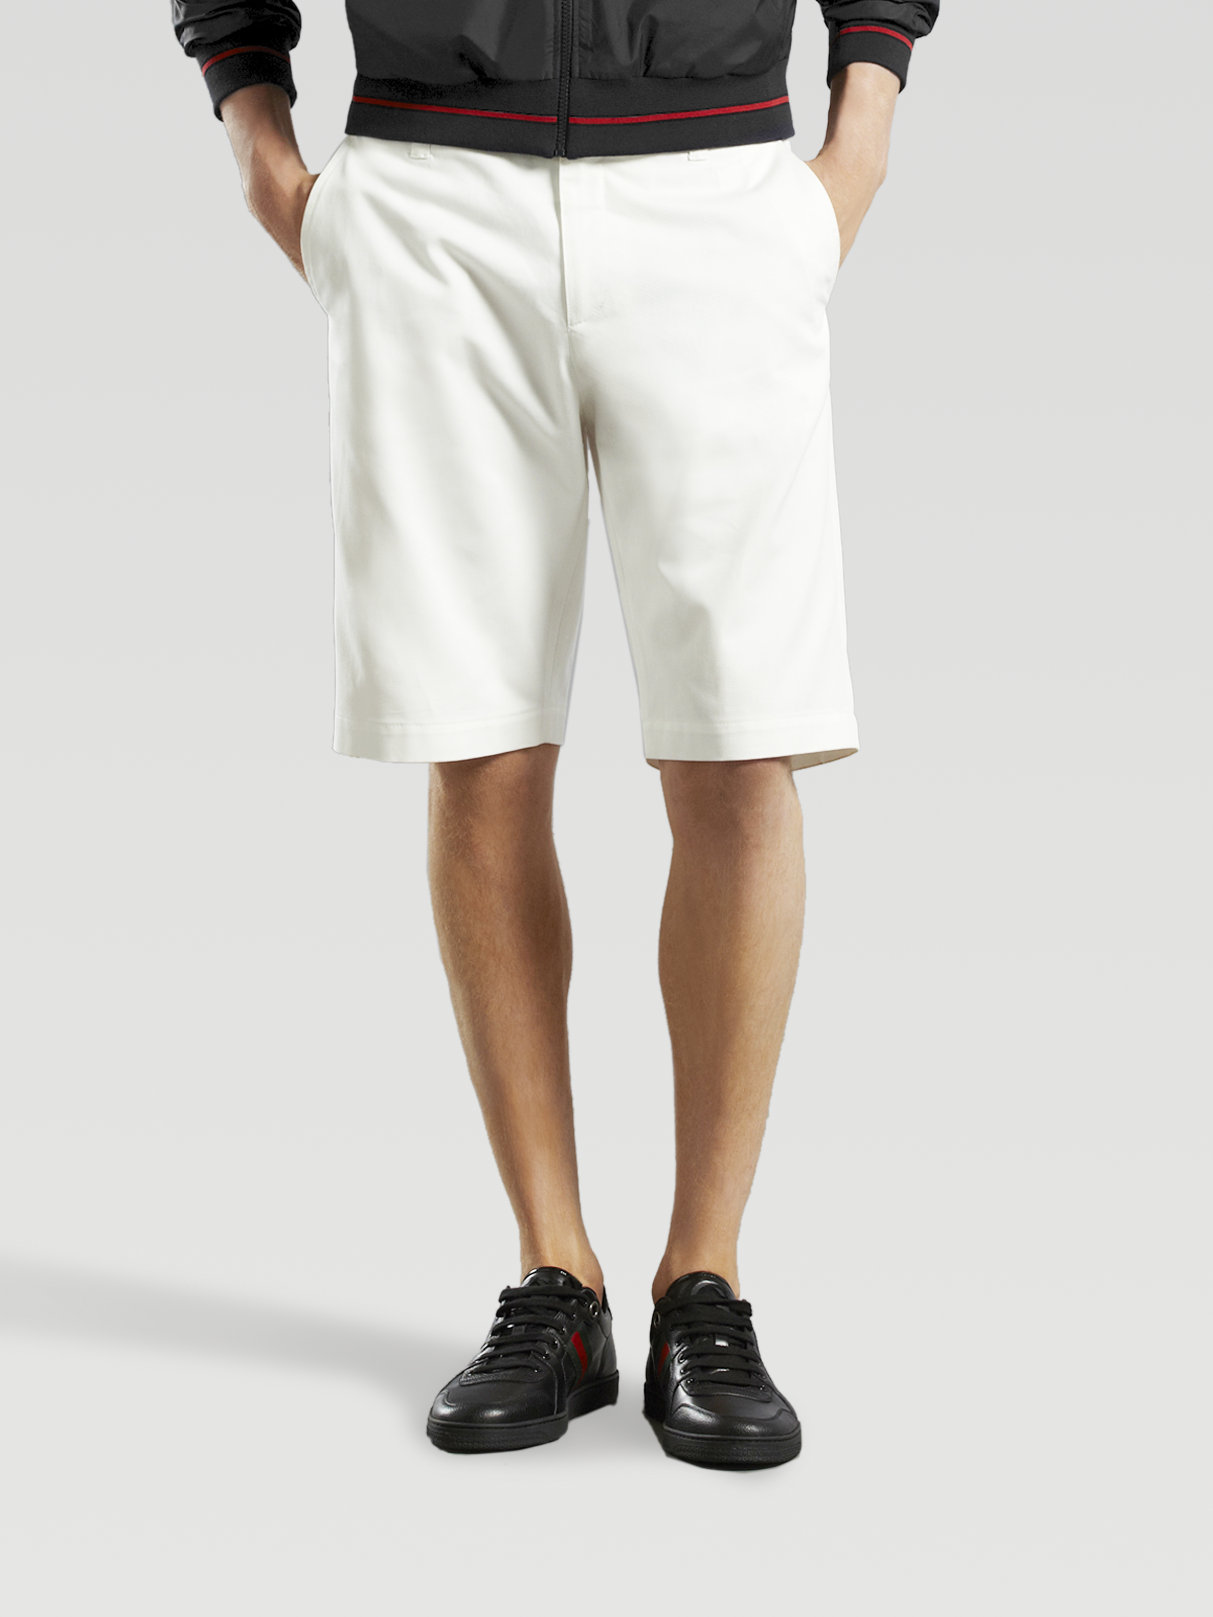 Lyst - Gucci Long Bermuda Shorts in White for Men